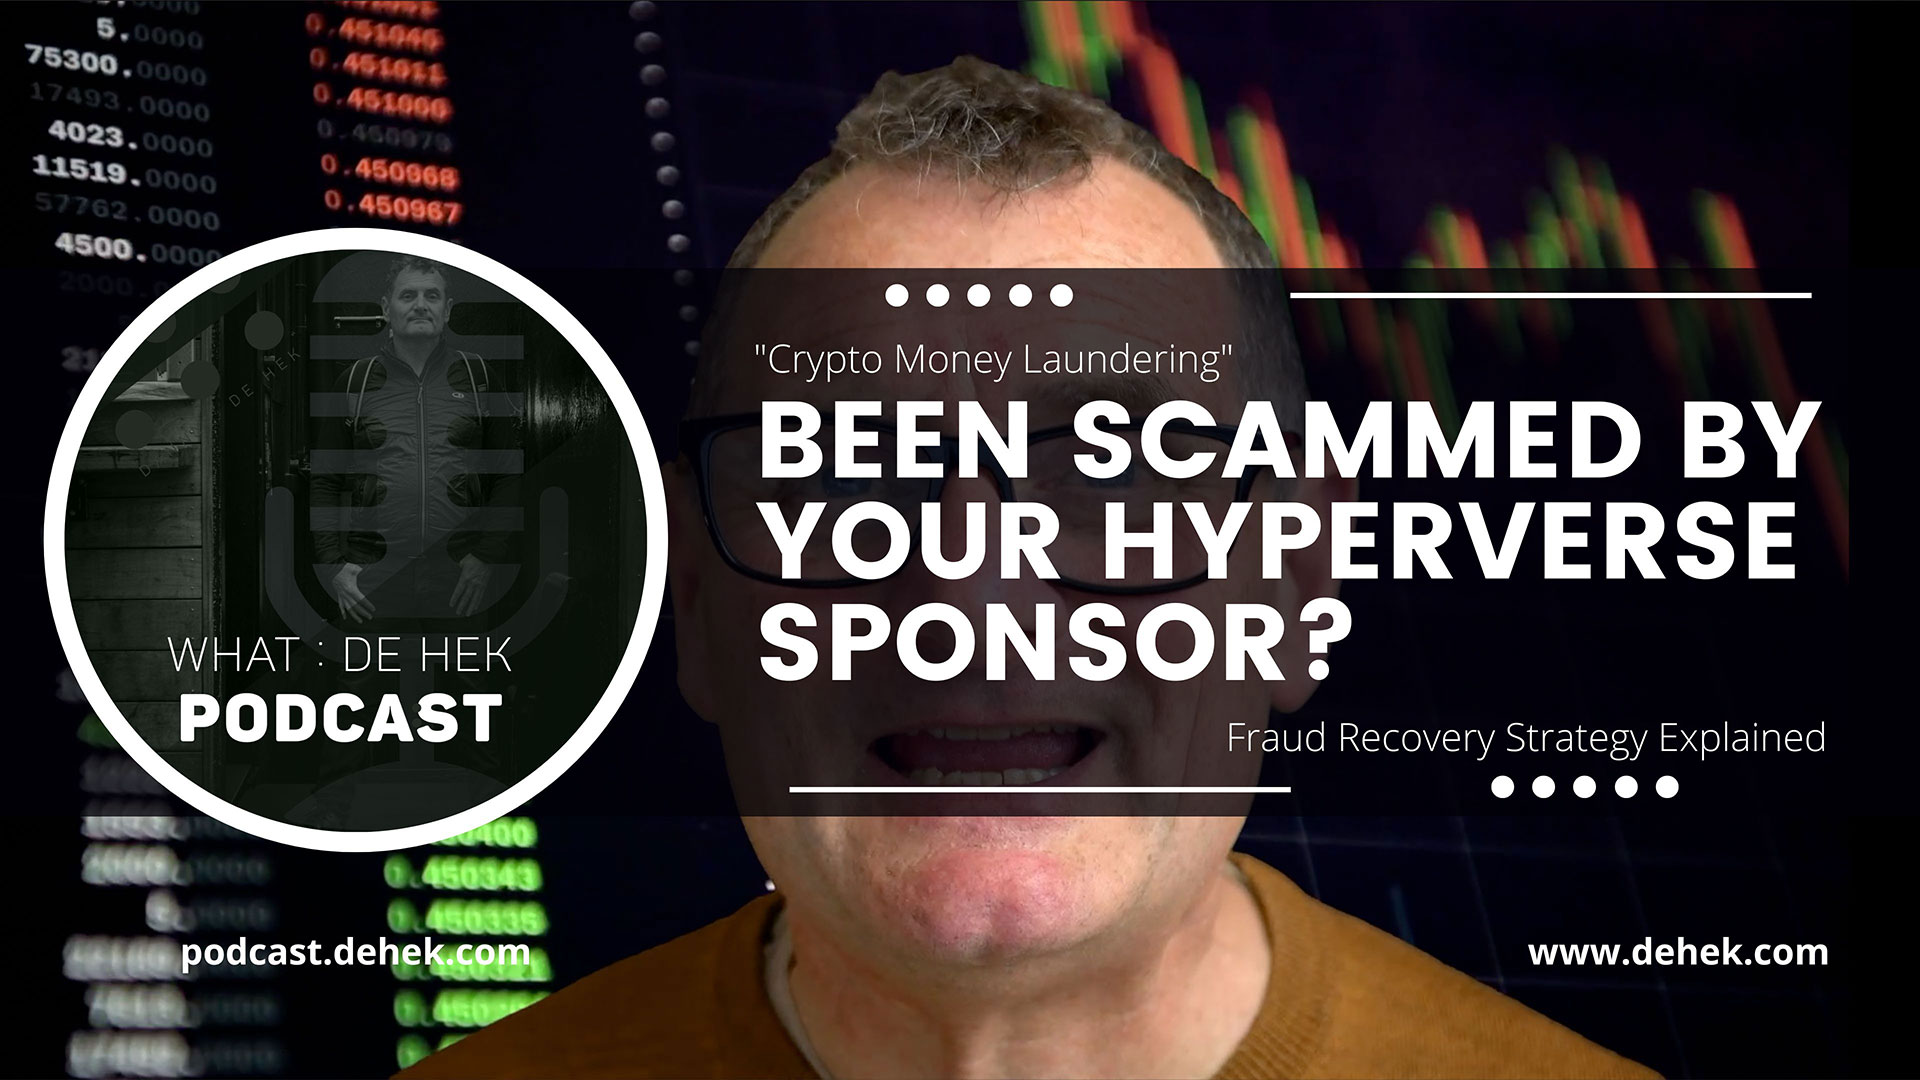 Crypto Money Laundering Been Scammed by your HyperVerse Sponsor Fraud Recovery Strategy Explained Entrepreneur Decision Maker Connector Podcaster Educator